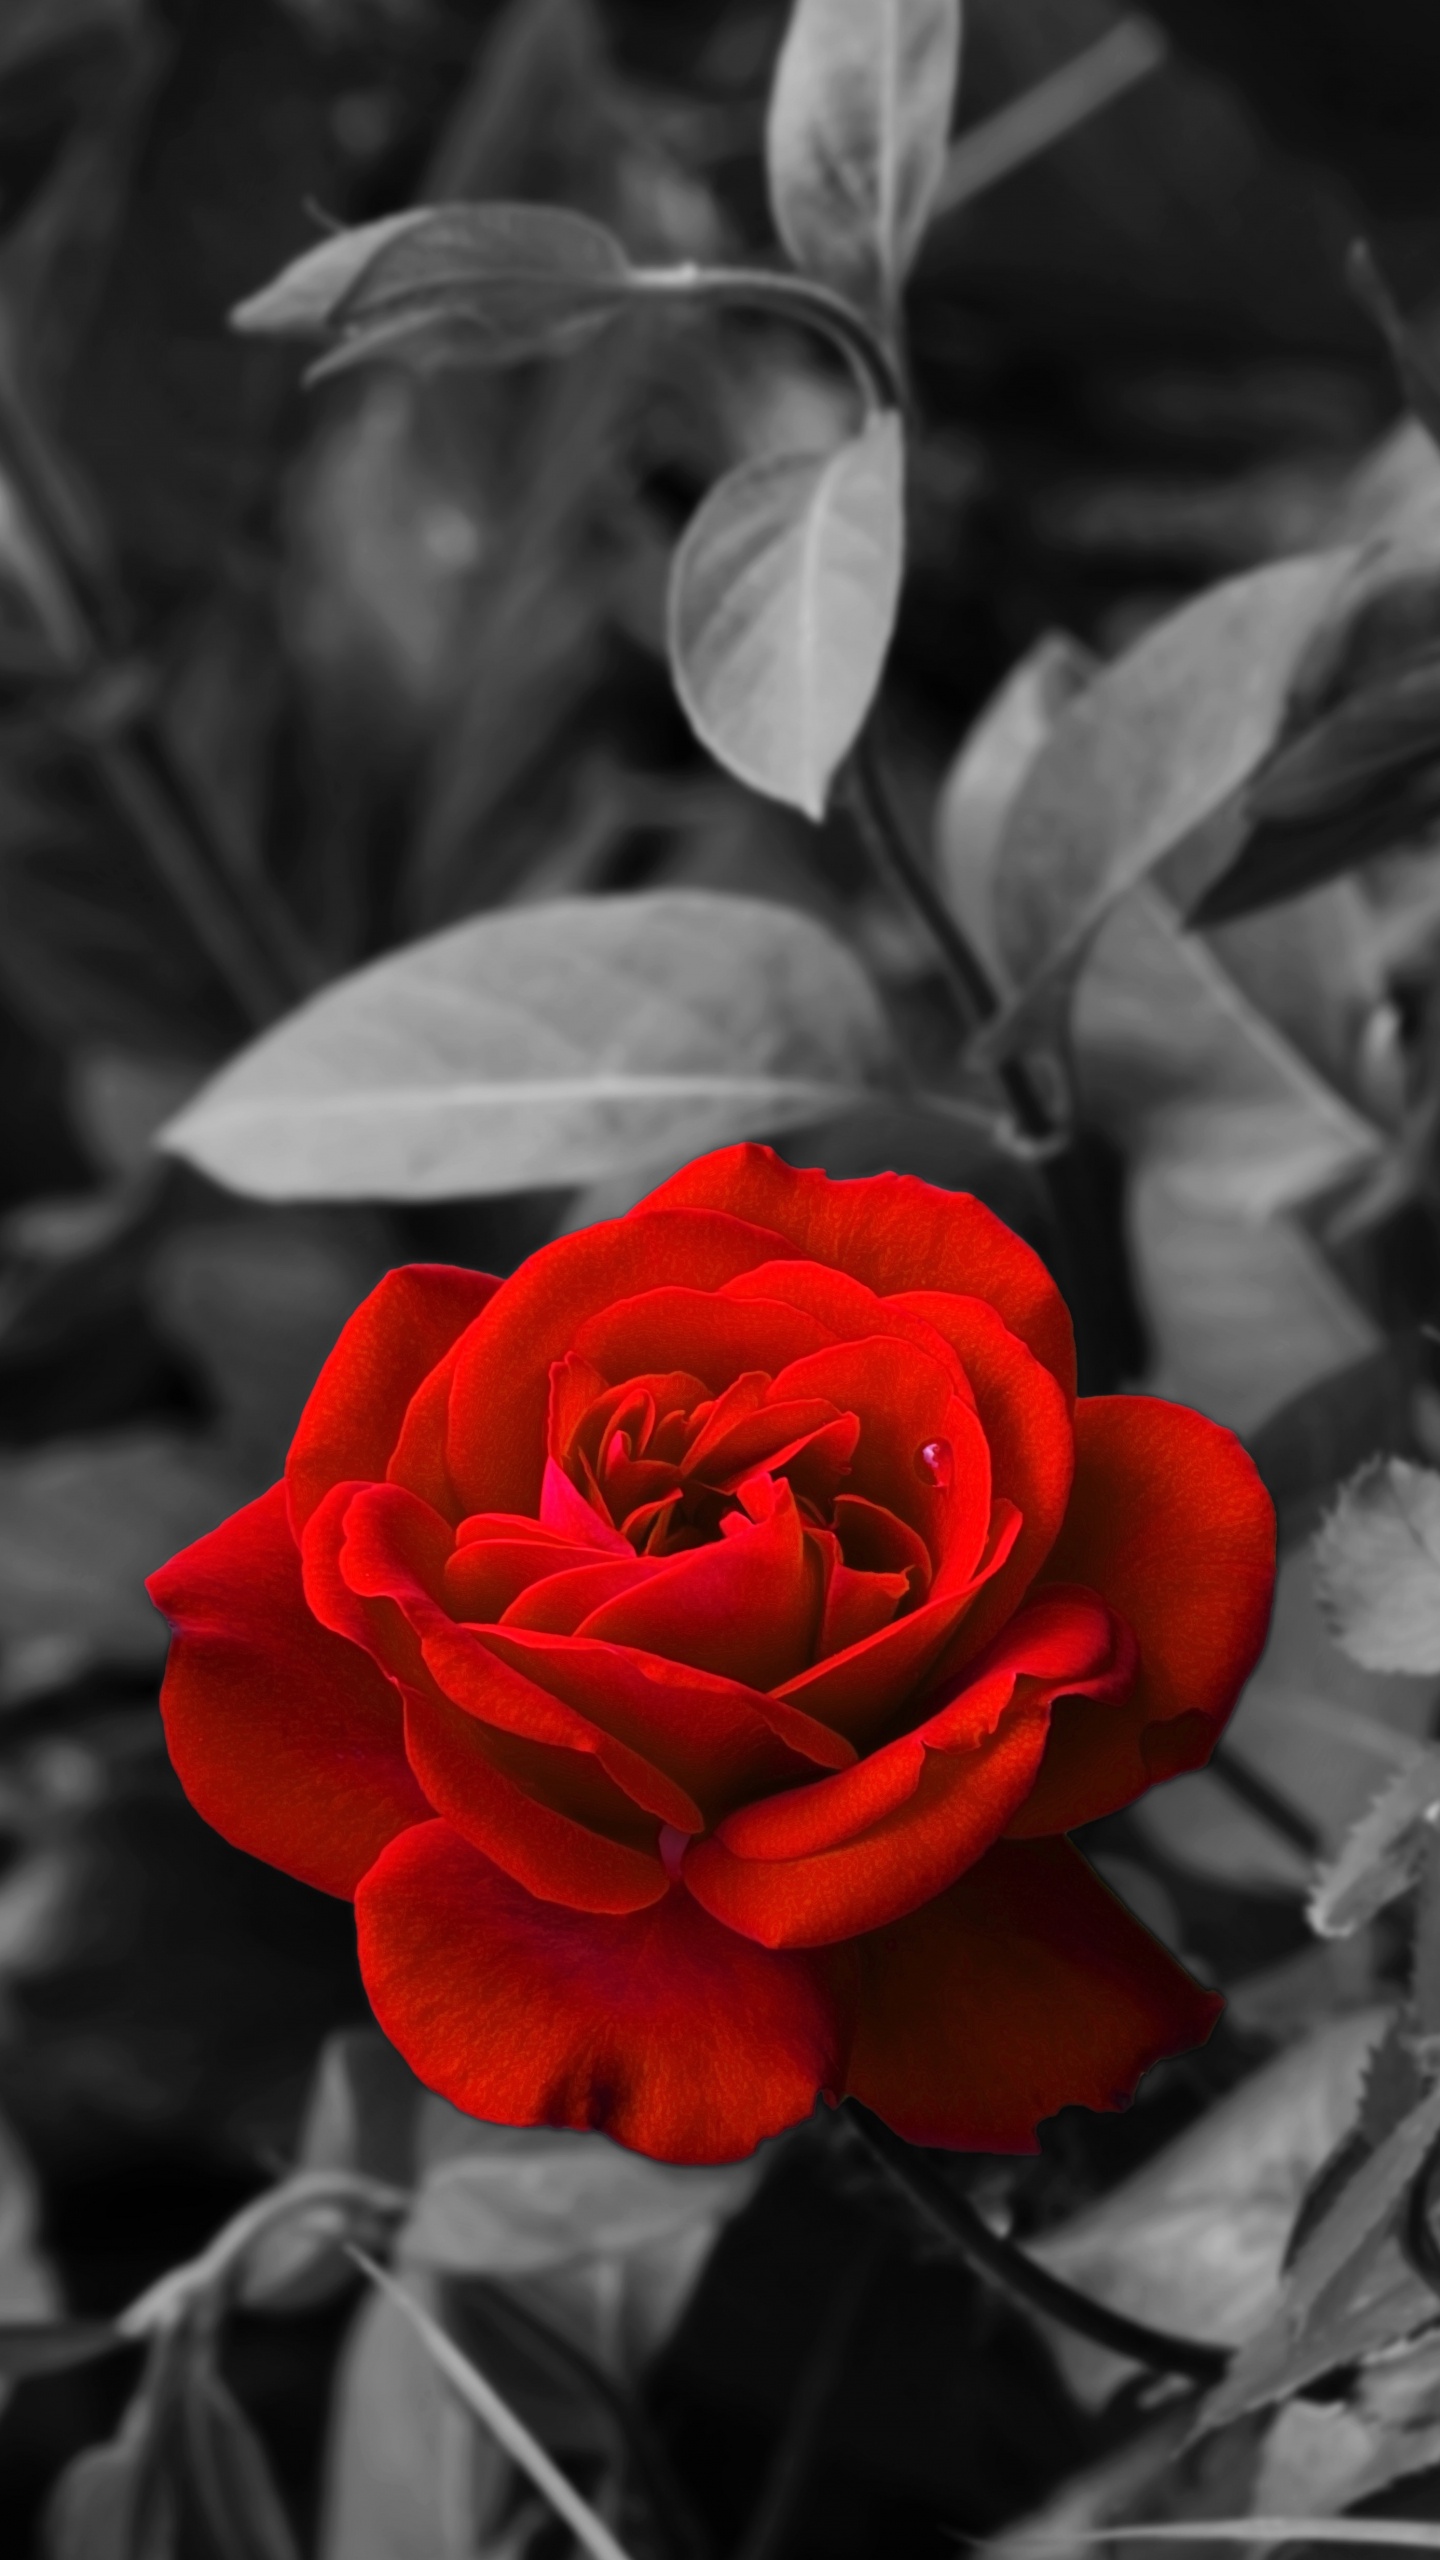 Red Rose in Bloom in Close up Photography. Wallpaper in 1440x2560 Resolution